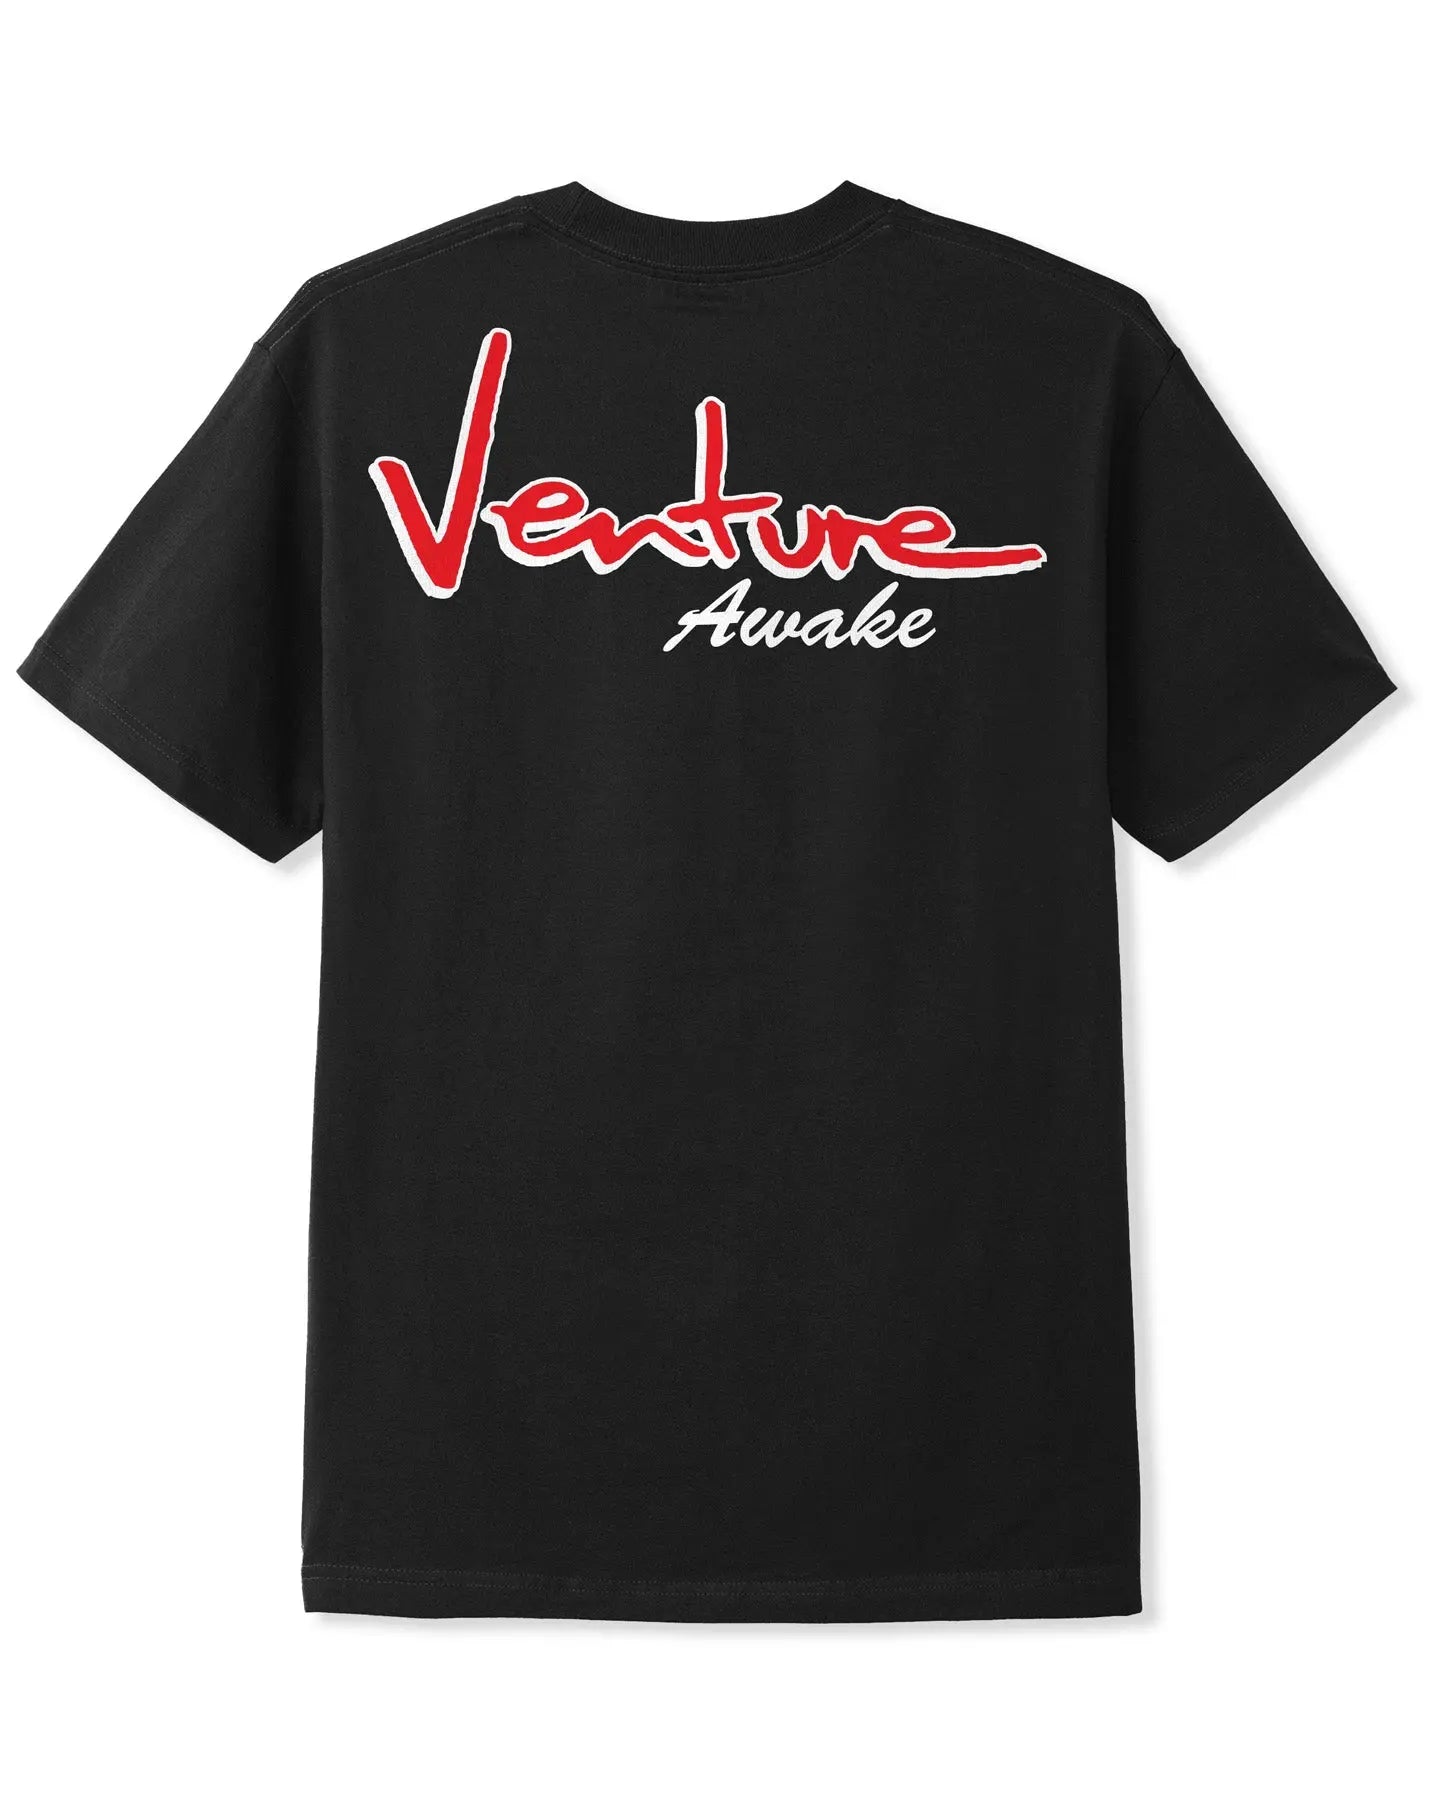 Cash Only x Venture Dollar Sign SS Tee - Black SS Tees